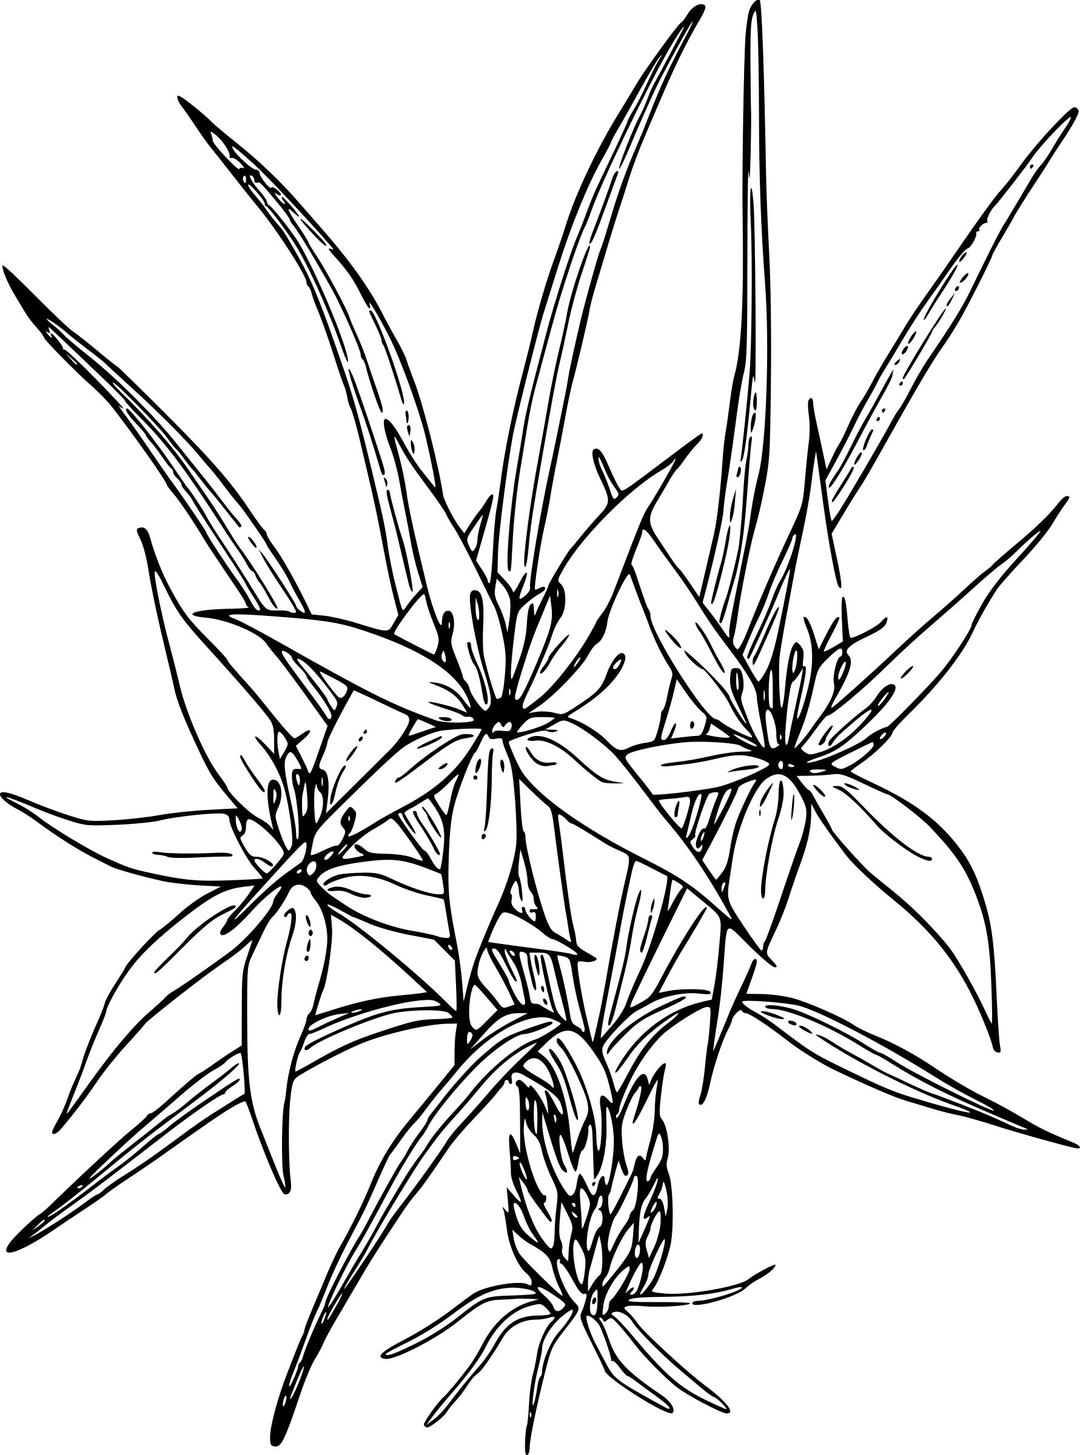 Sand lily png transparent